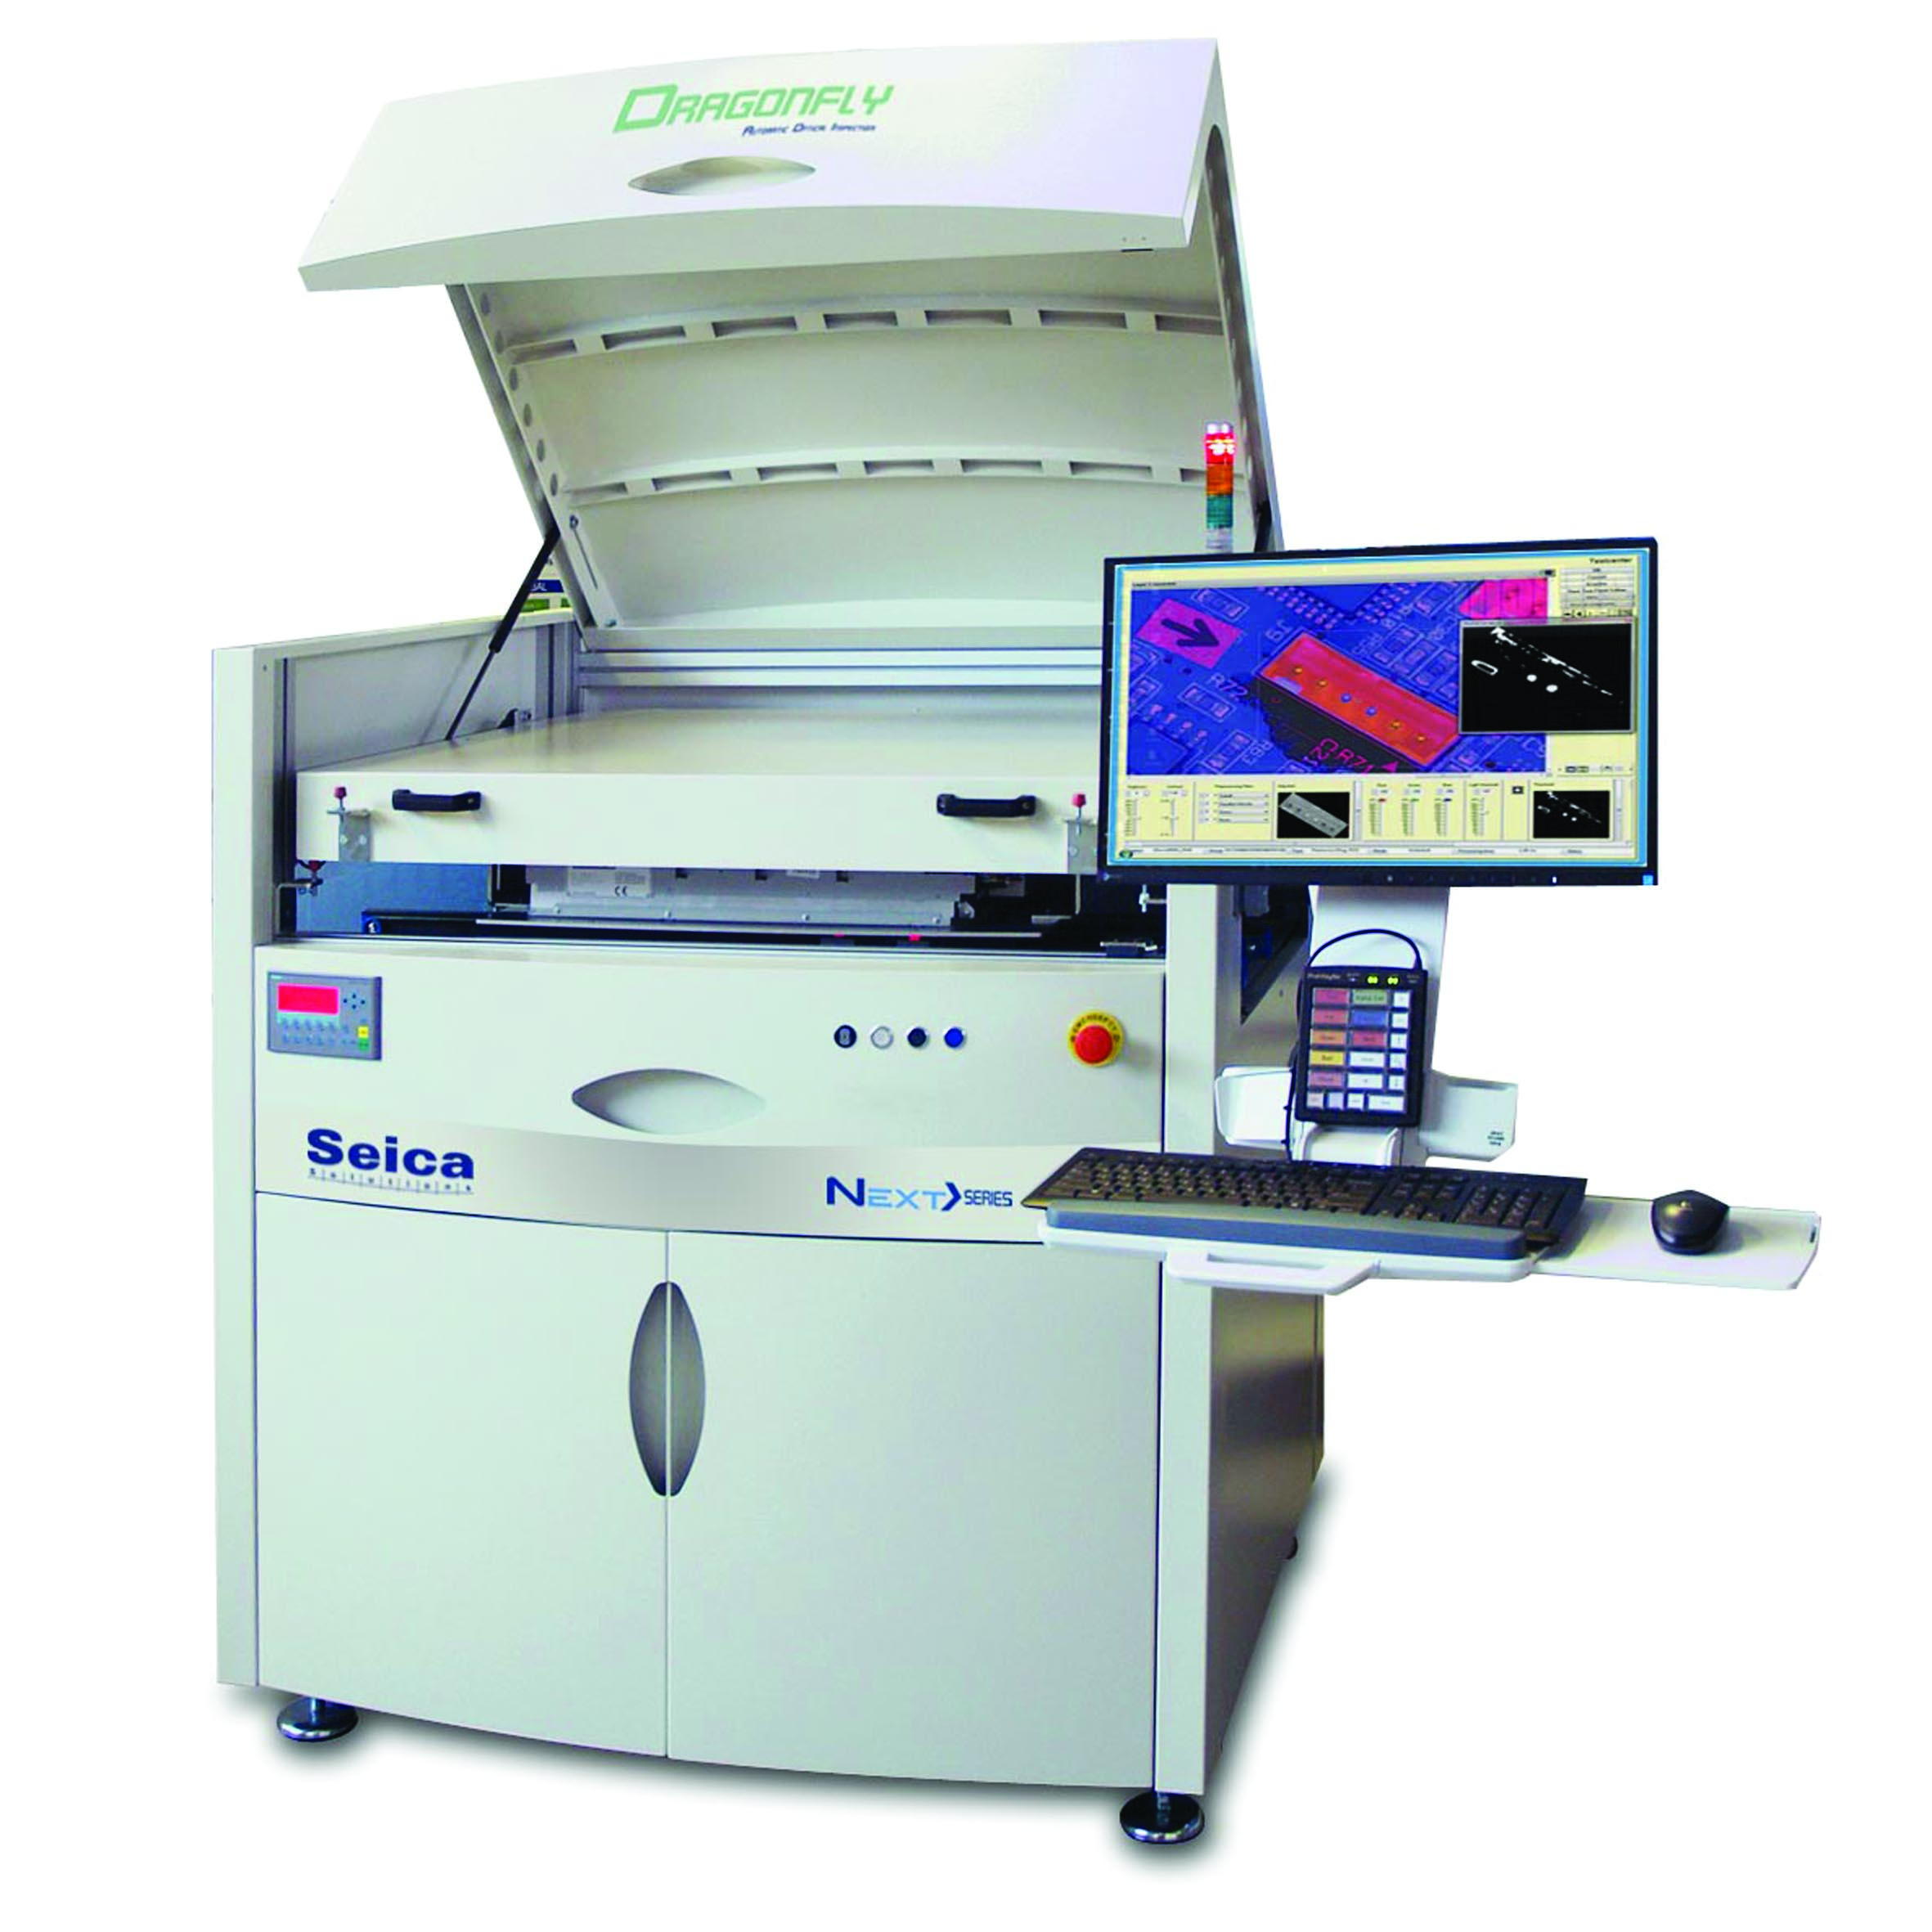 Inspection optique - Seica Spa - Global supplier of Automatic Test  Equipment (ATE)